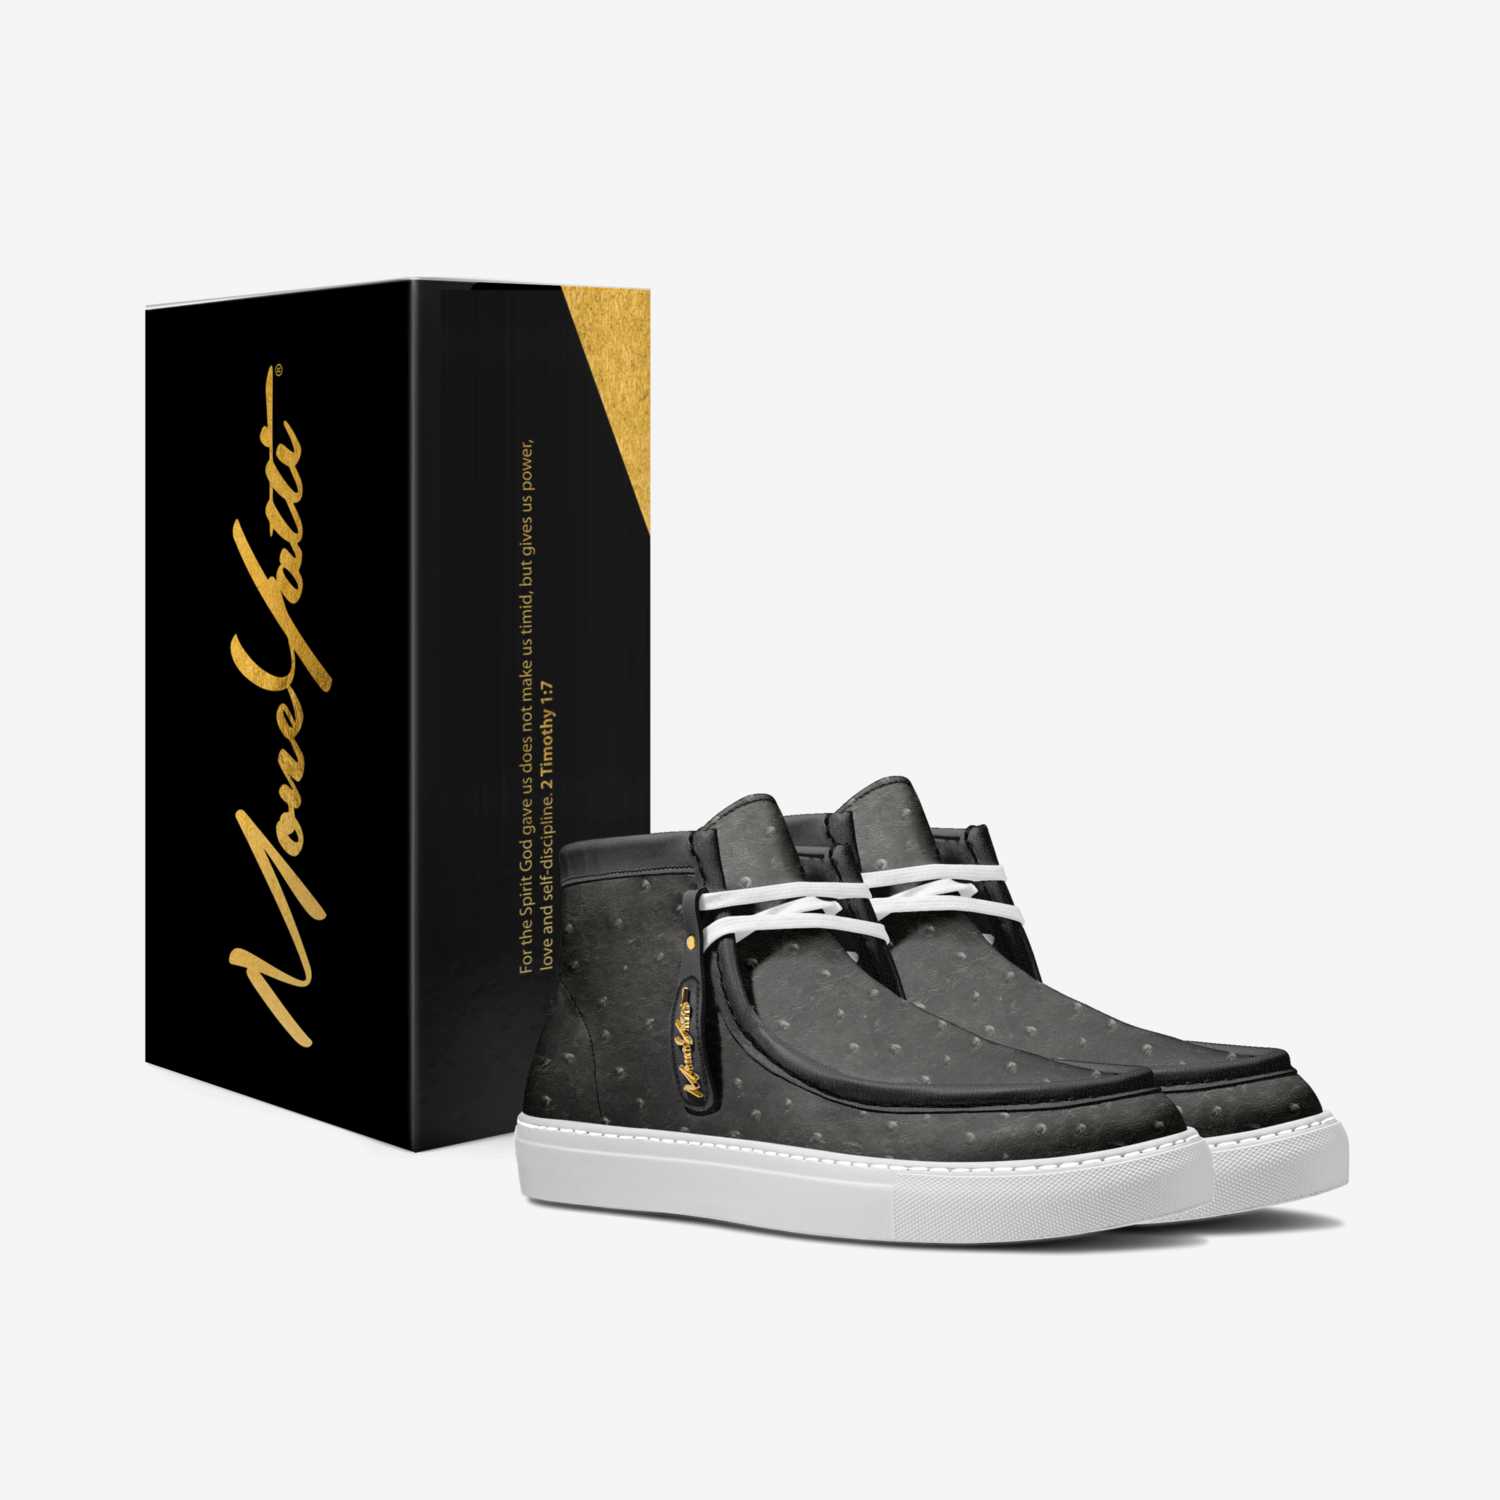 LUX 009 custom made in Italy shoes by Moneyatti Brand | Box view